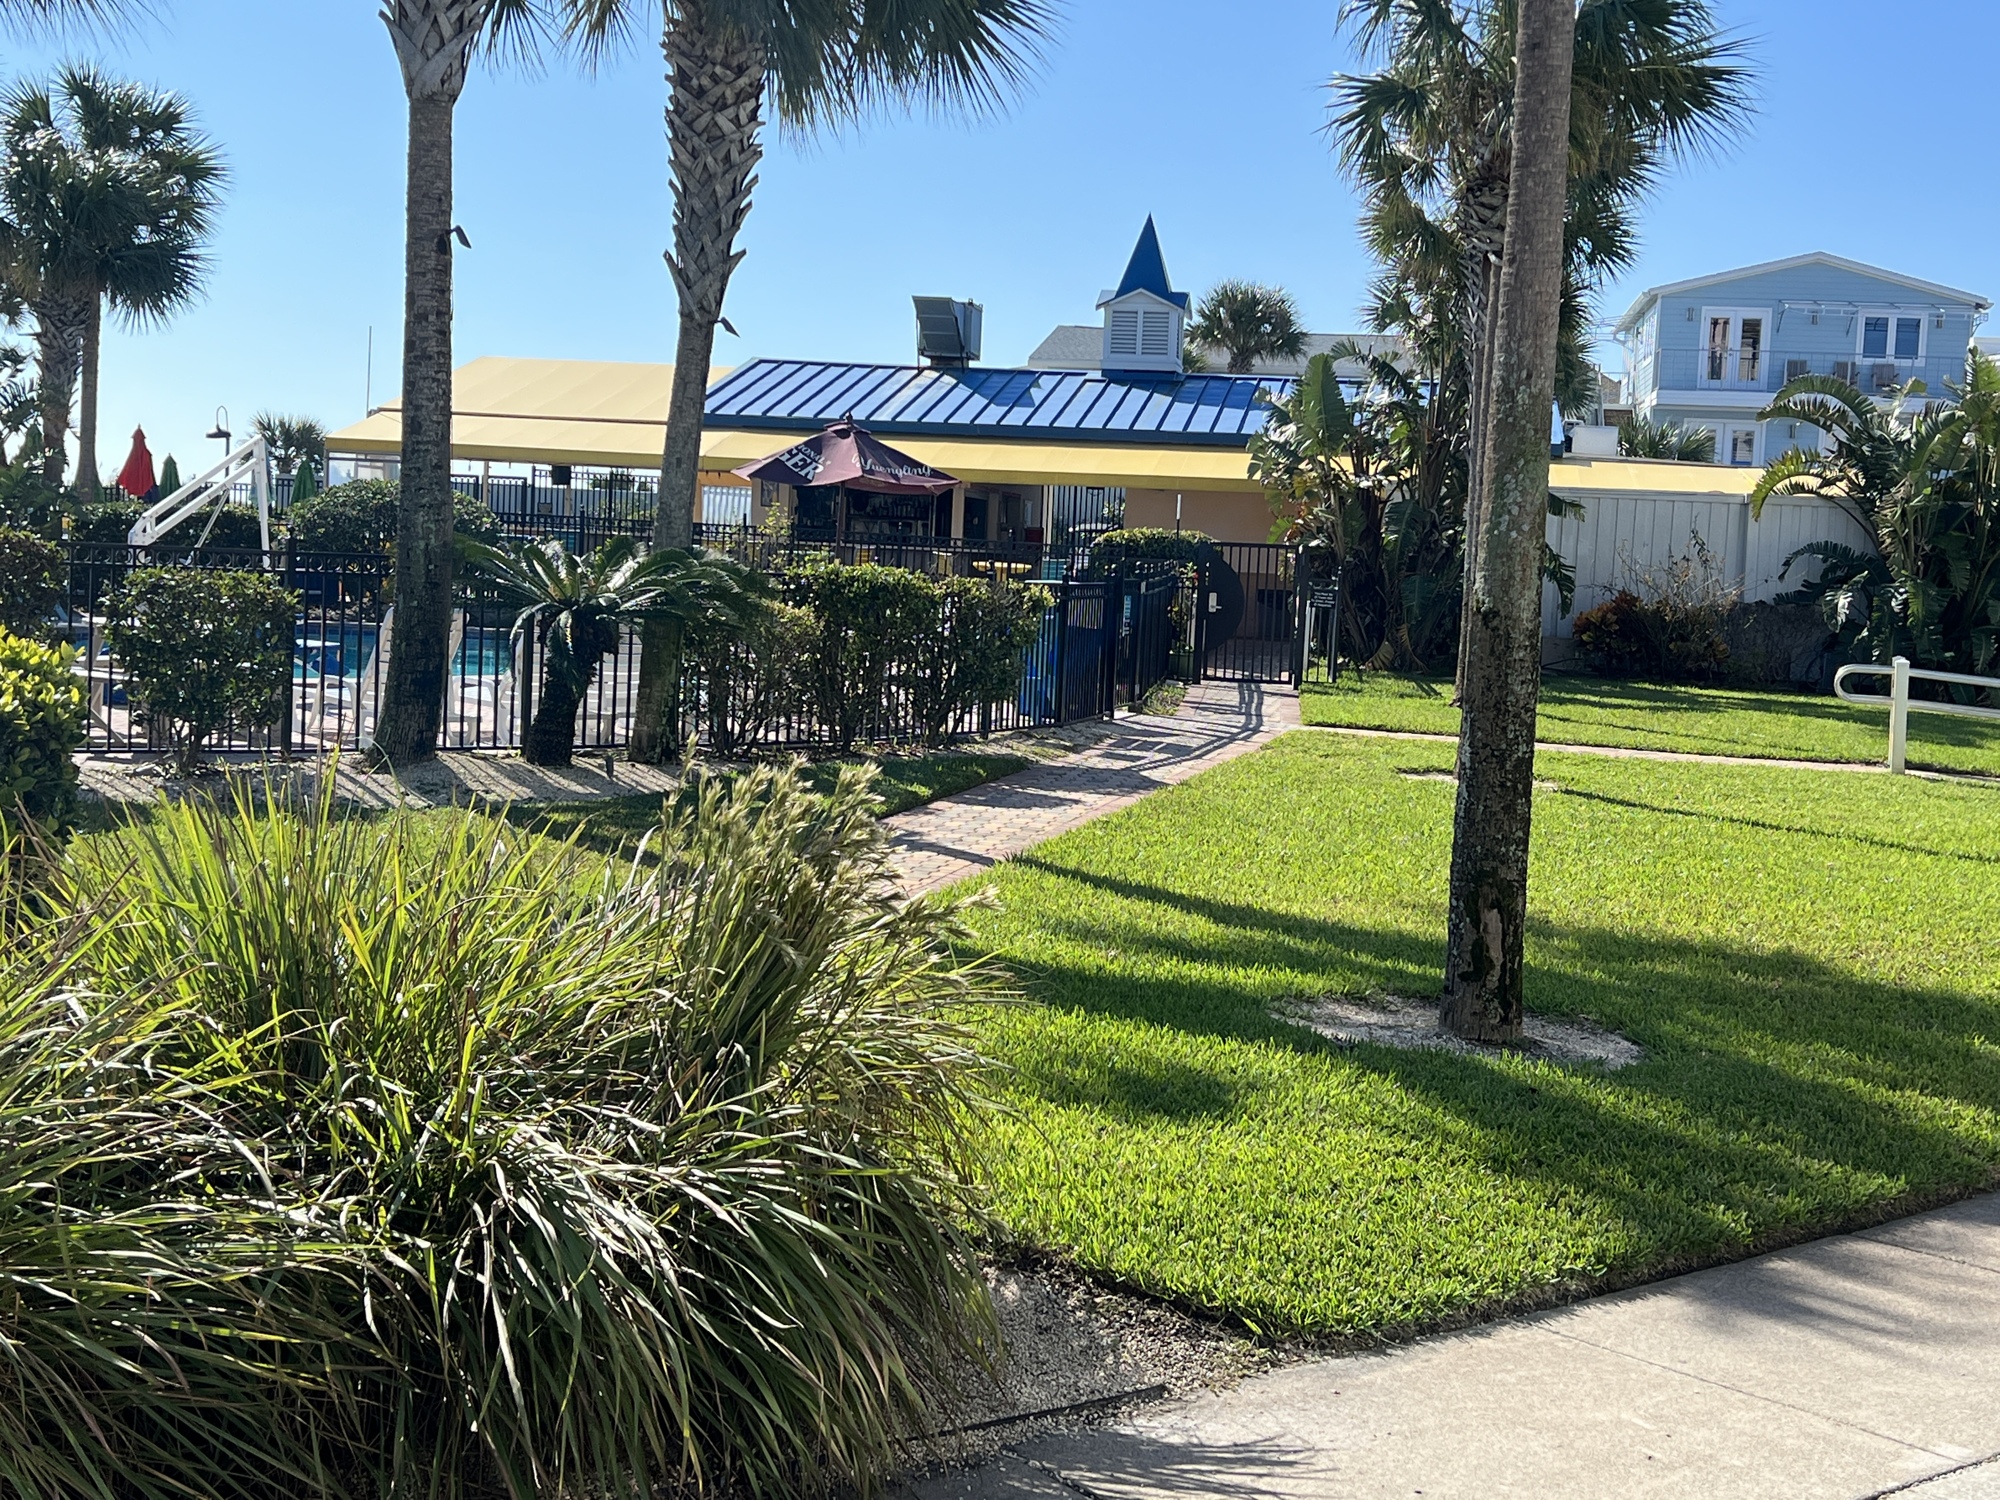 Photo by Dan Macdonald: Jacksonville Jaguars owner Shad Khan's investment company says it will buy the Seahorse Oceanfront Inn and Lemon Bar in Neptune Beach at 120 Atlantic Blvd.